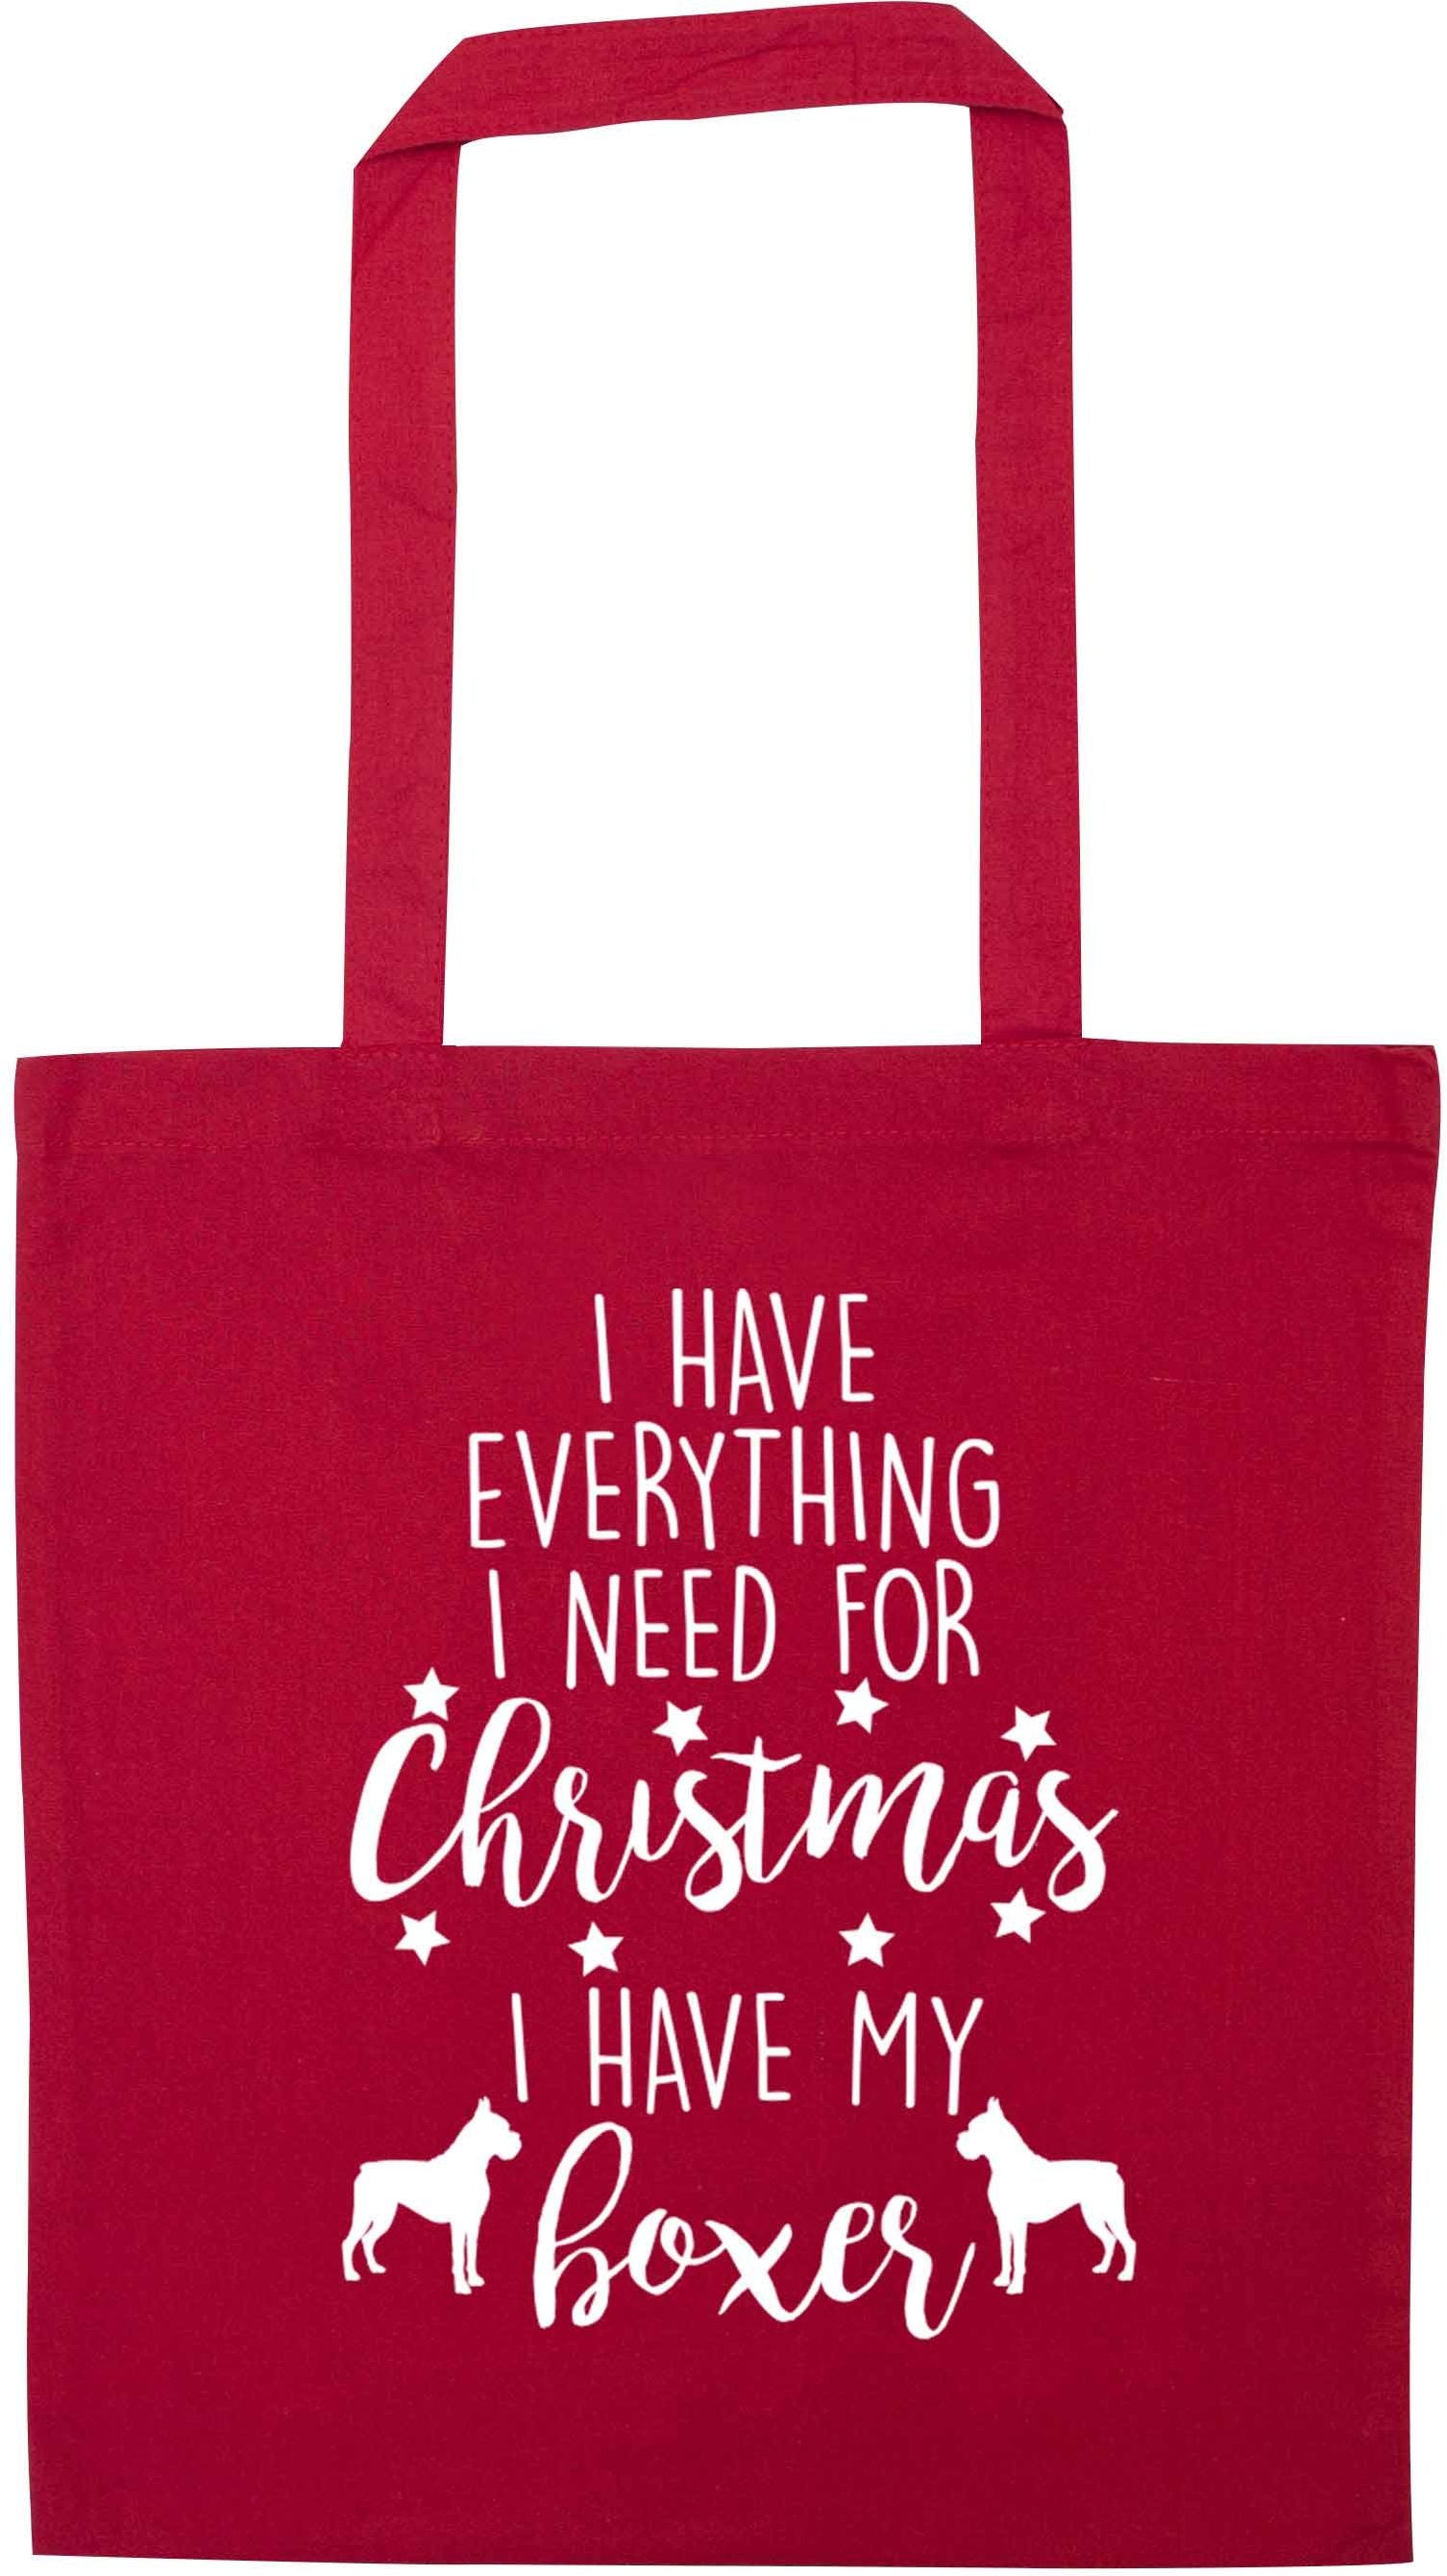 I have everything I need for Christmas I have my boxer red tote bag